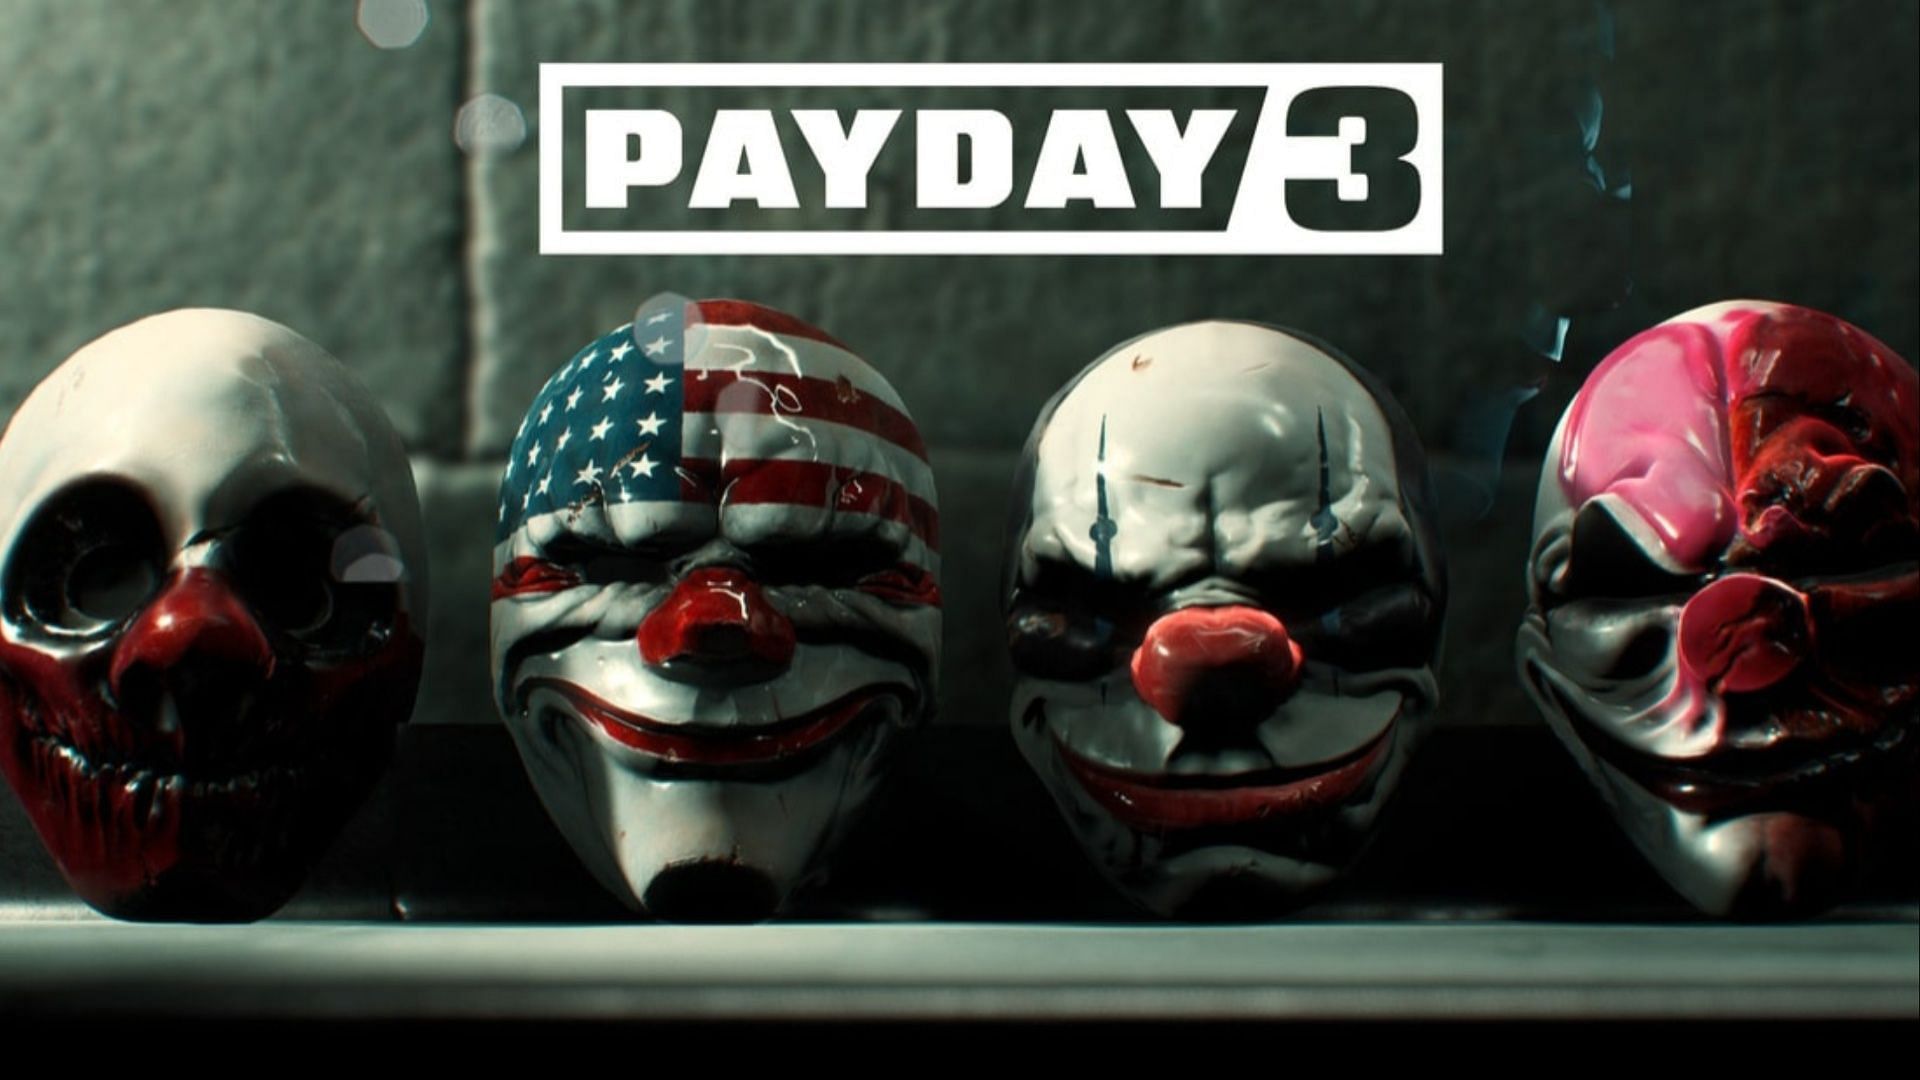 Payday 3: Payday 3 pre order guide: Editions, prices